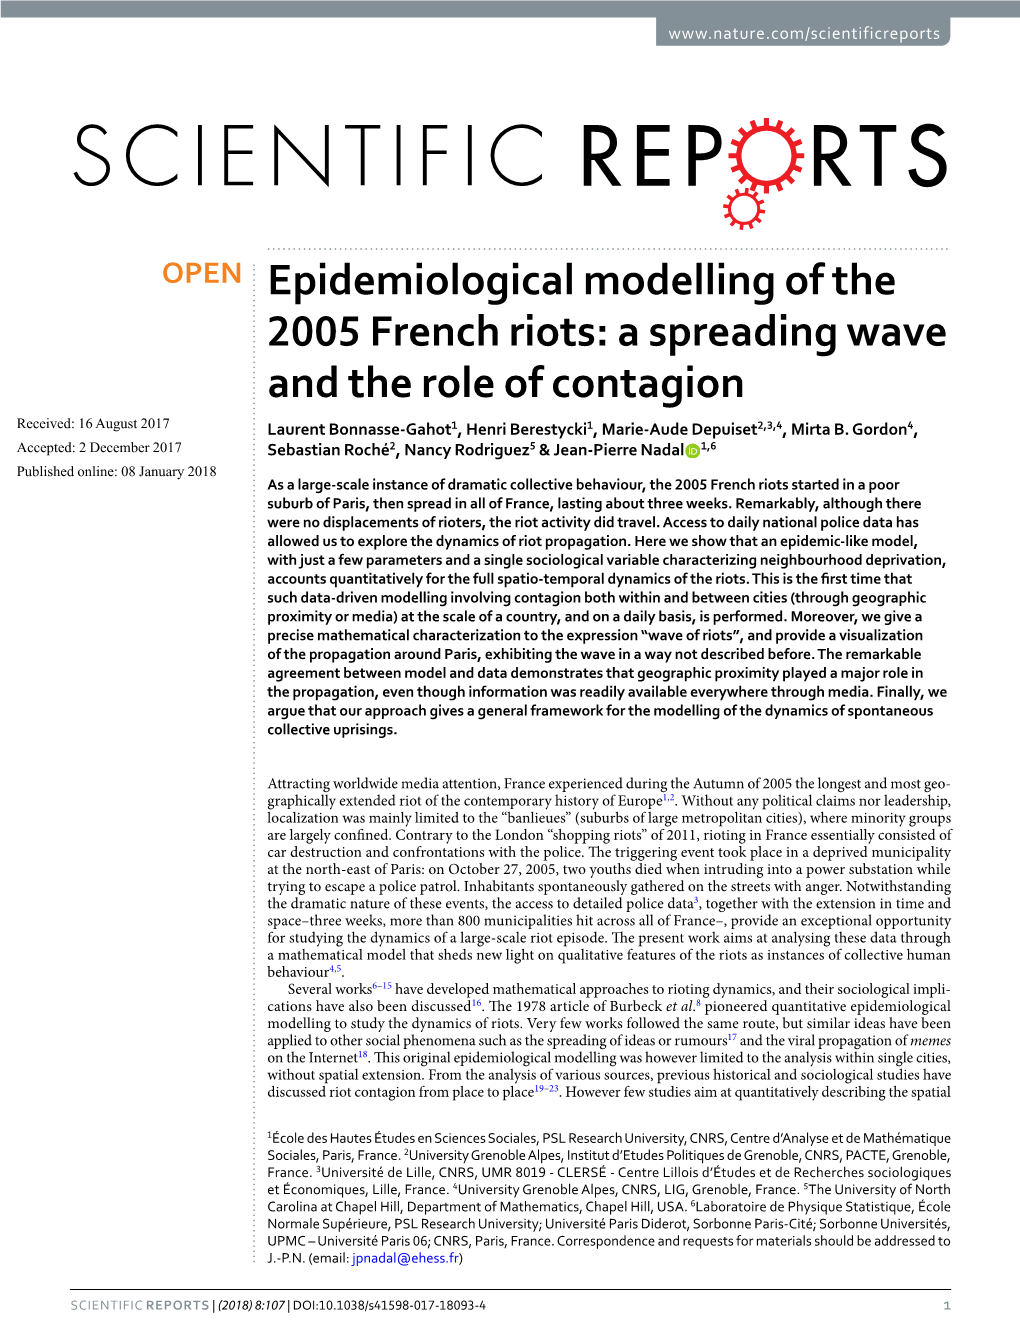 Epidemiological Modelling of the 2005 French Riots